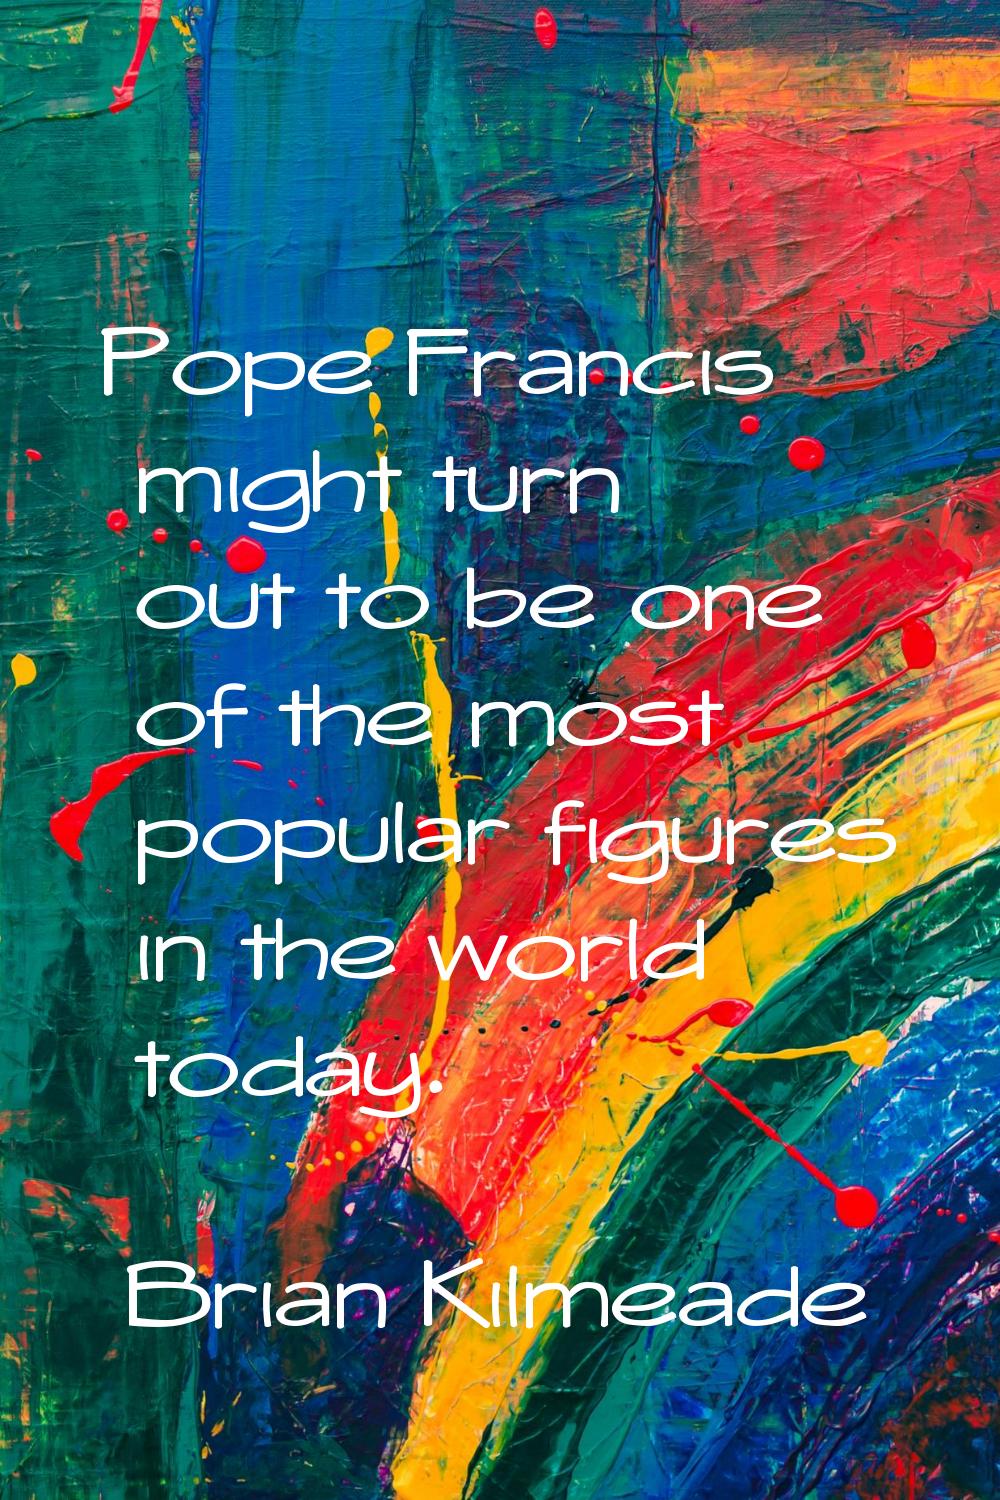 Pope Francis might turn out to be one of the most popular figures in the world today.